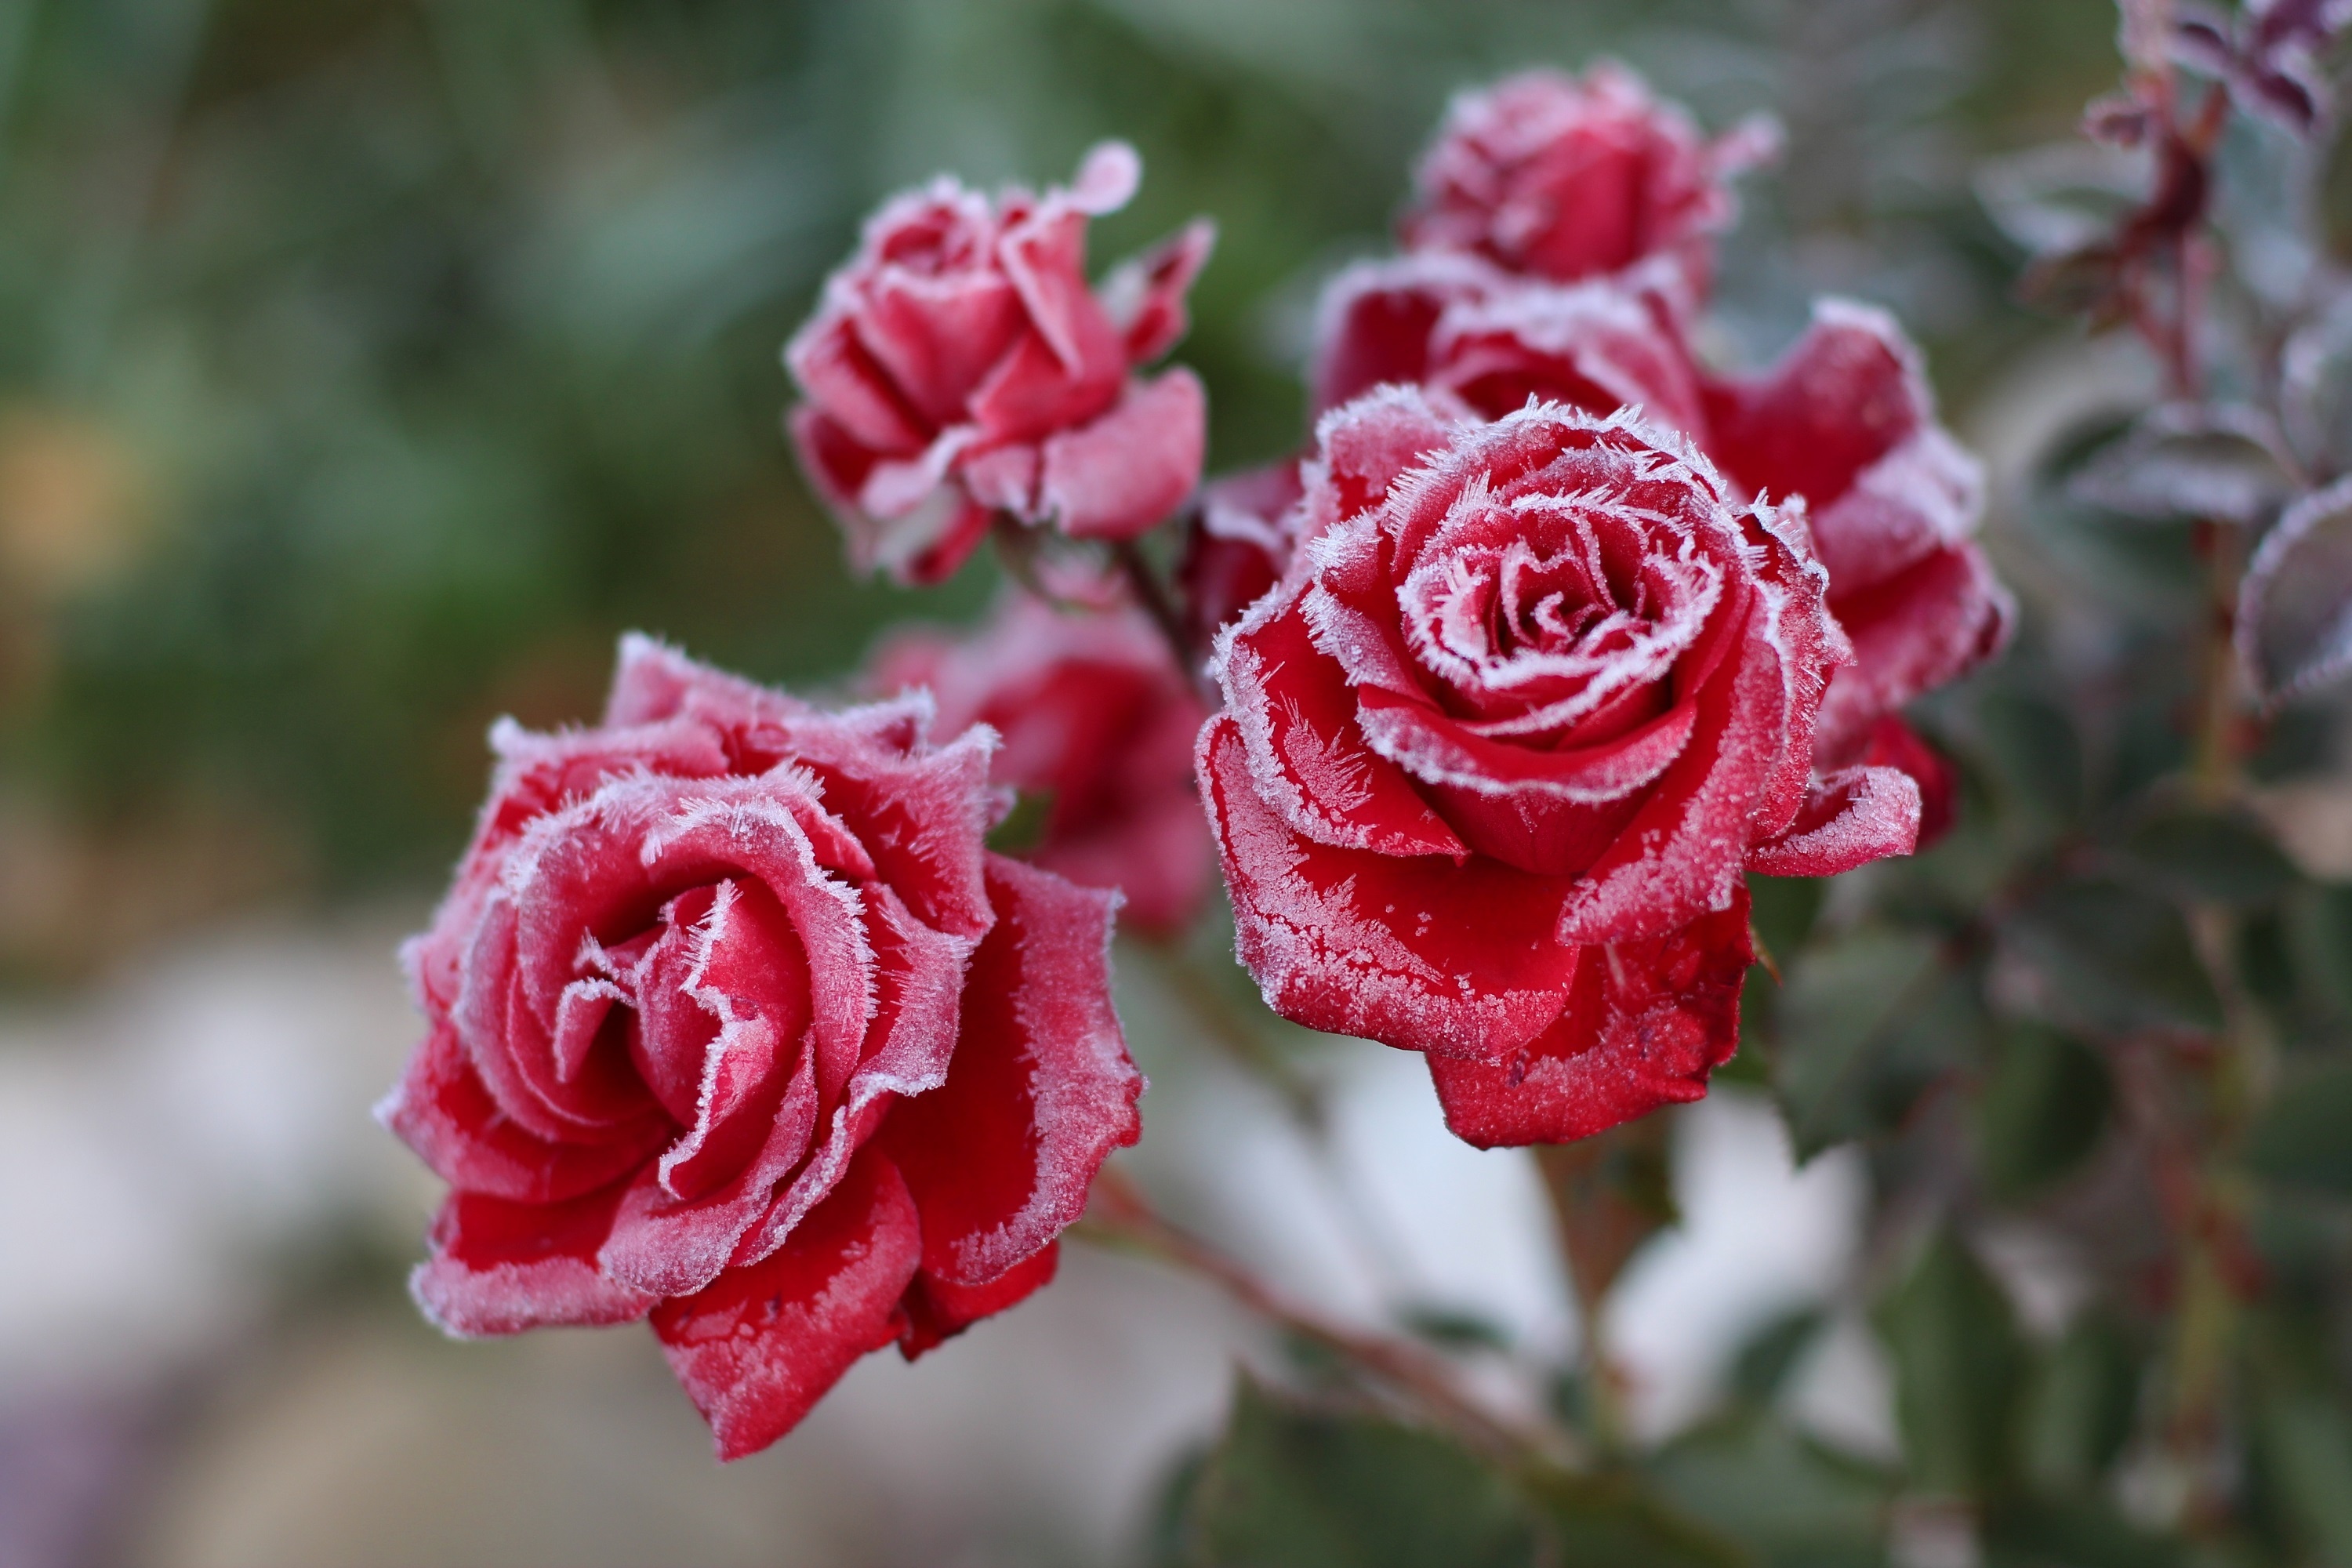 Wallpaper. Flowers. photo. picture. flowers, rose, frost, frost